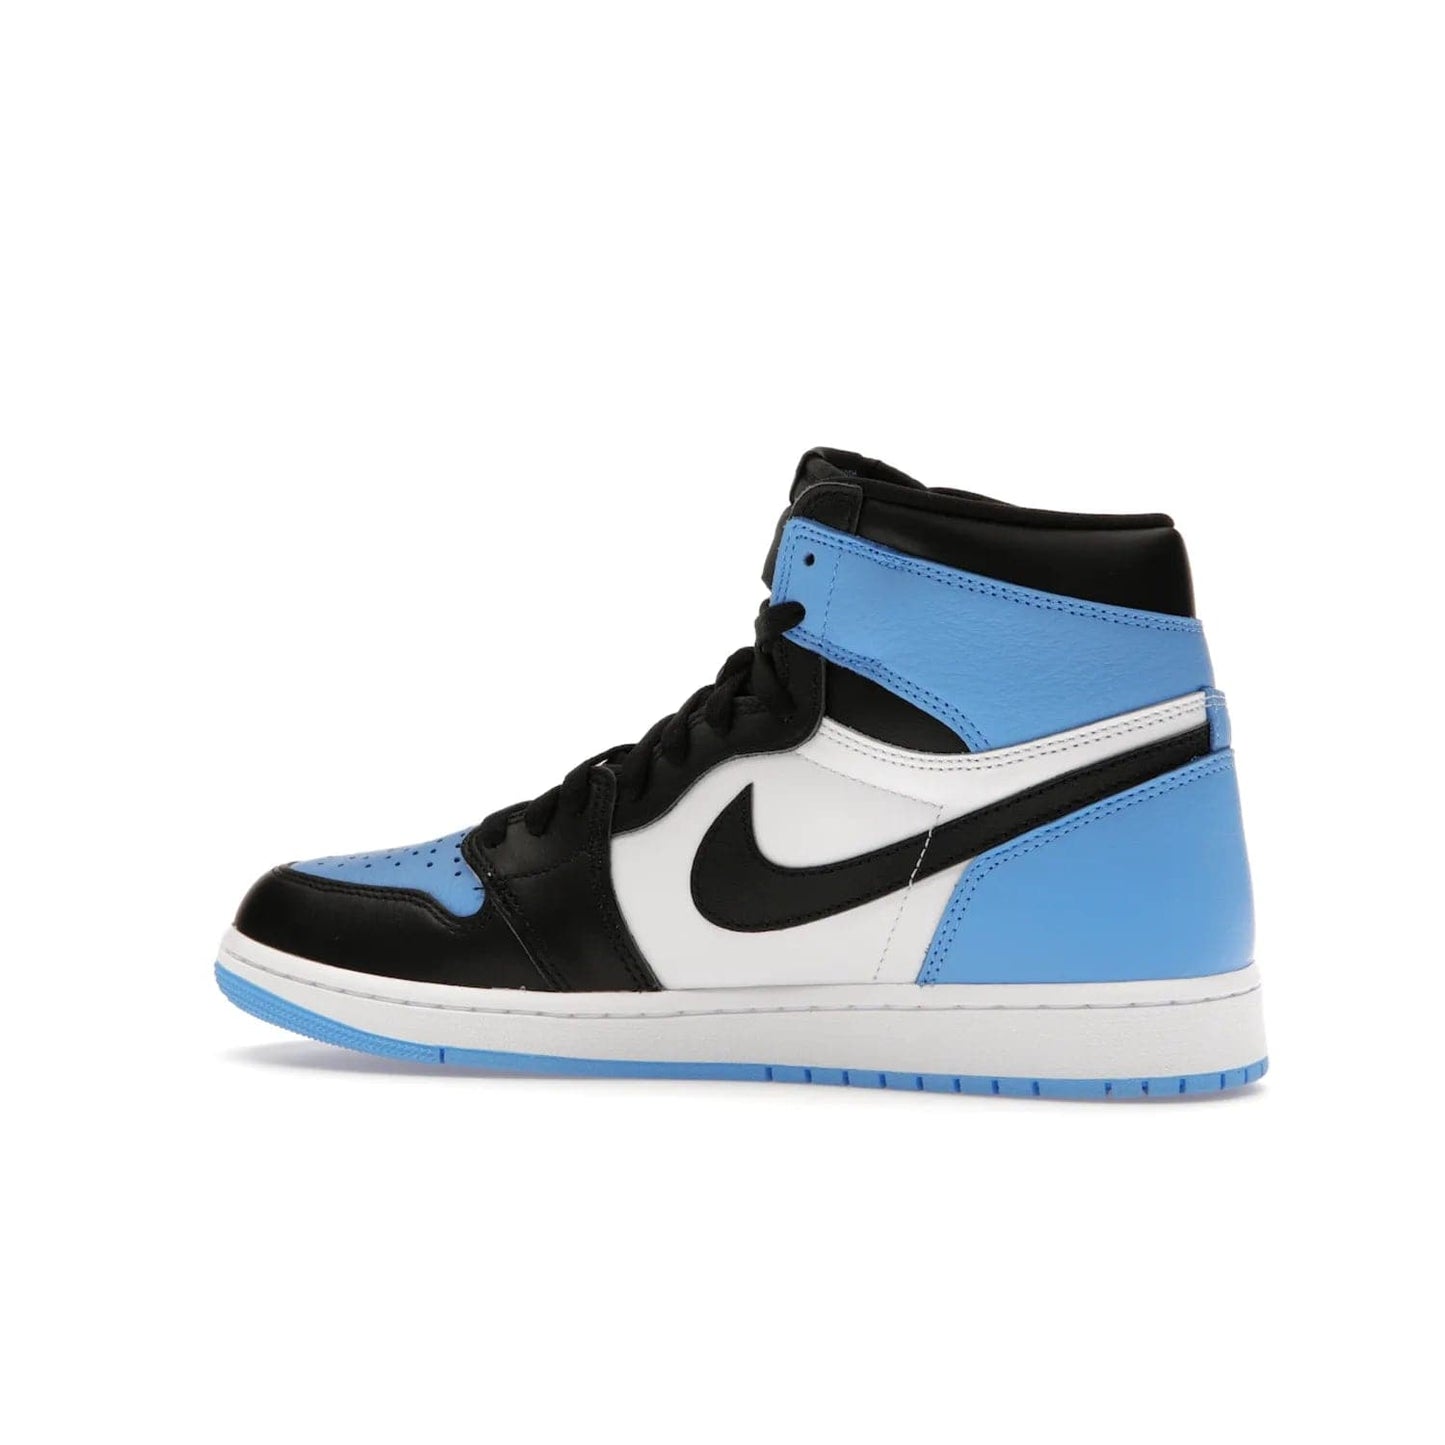 Jordan 1 Retro High OG UNC Toe - Image 21 - Only at www.BallersClubKickz.com - Jordan 1 High OG UNC Toe is a fashionable, high-quality sneaker featuring University Blue, Black White and White. Releasing July 22, 2023, it's the perfect pick up for sneakerheads.